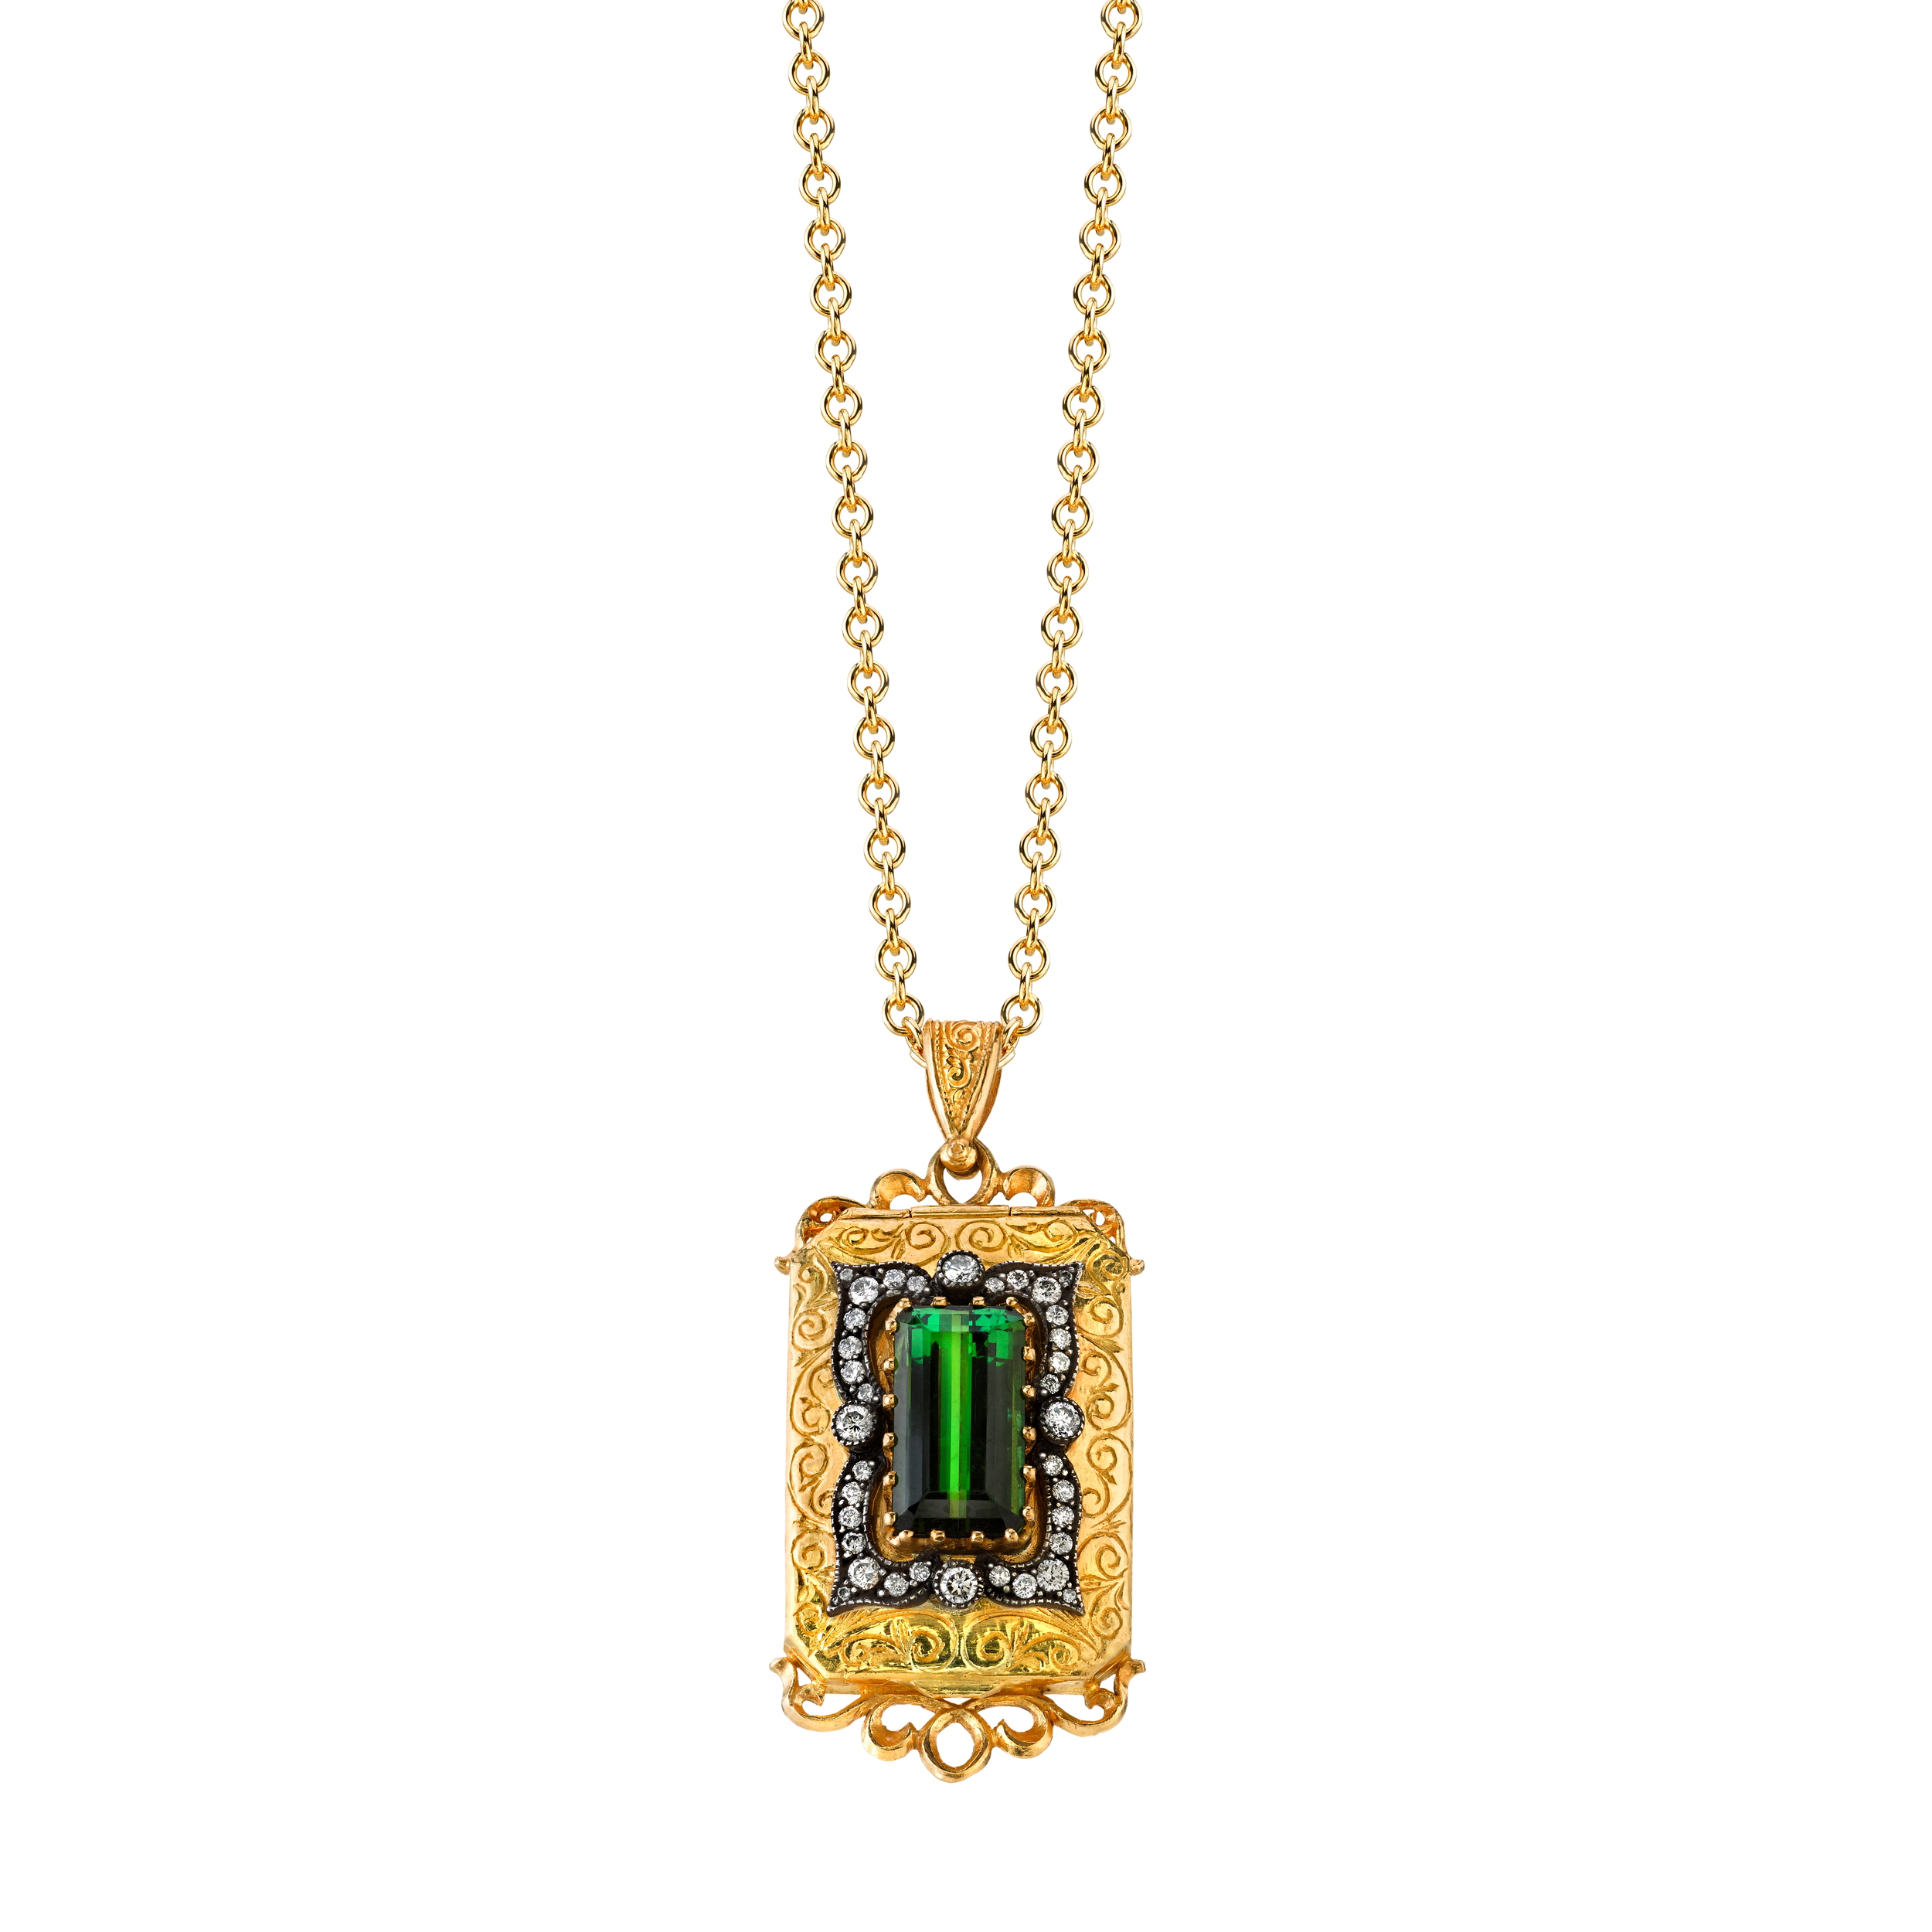  22K and silver locket with green tourmaline and diamonds, $16,500.&nbsp; 